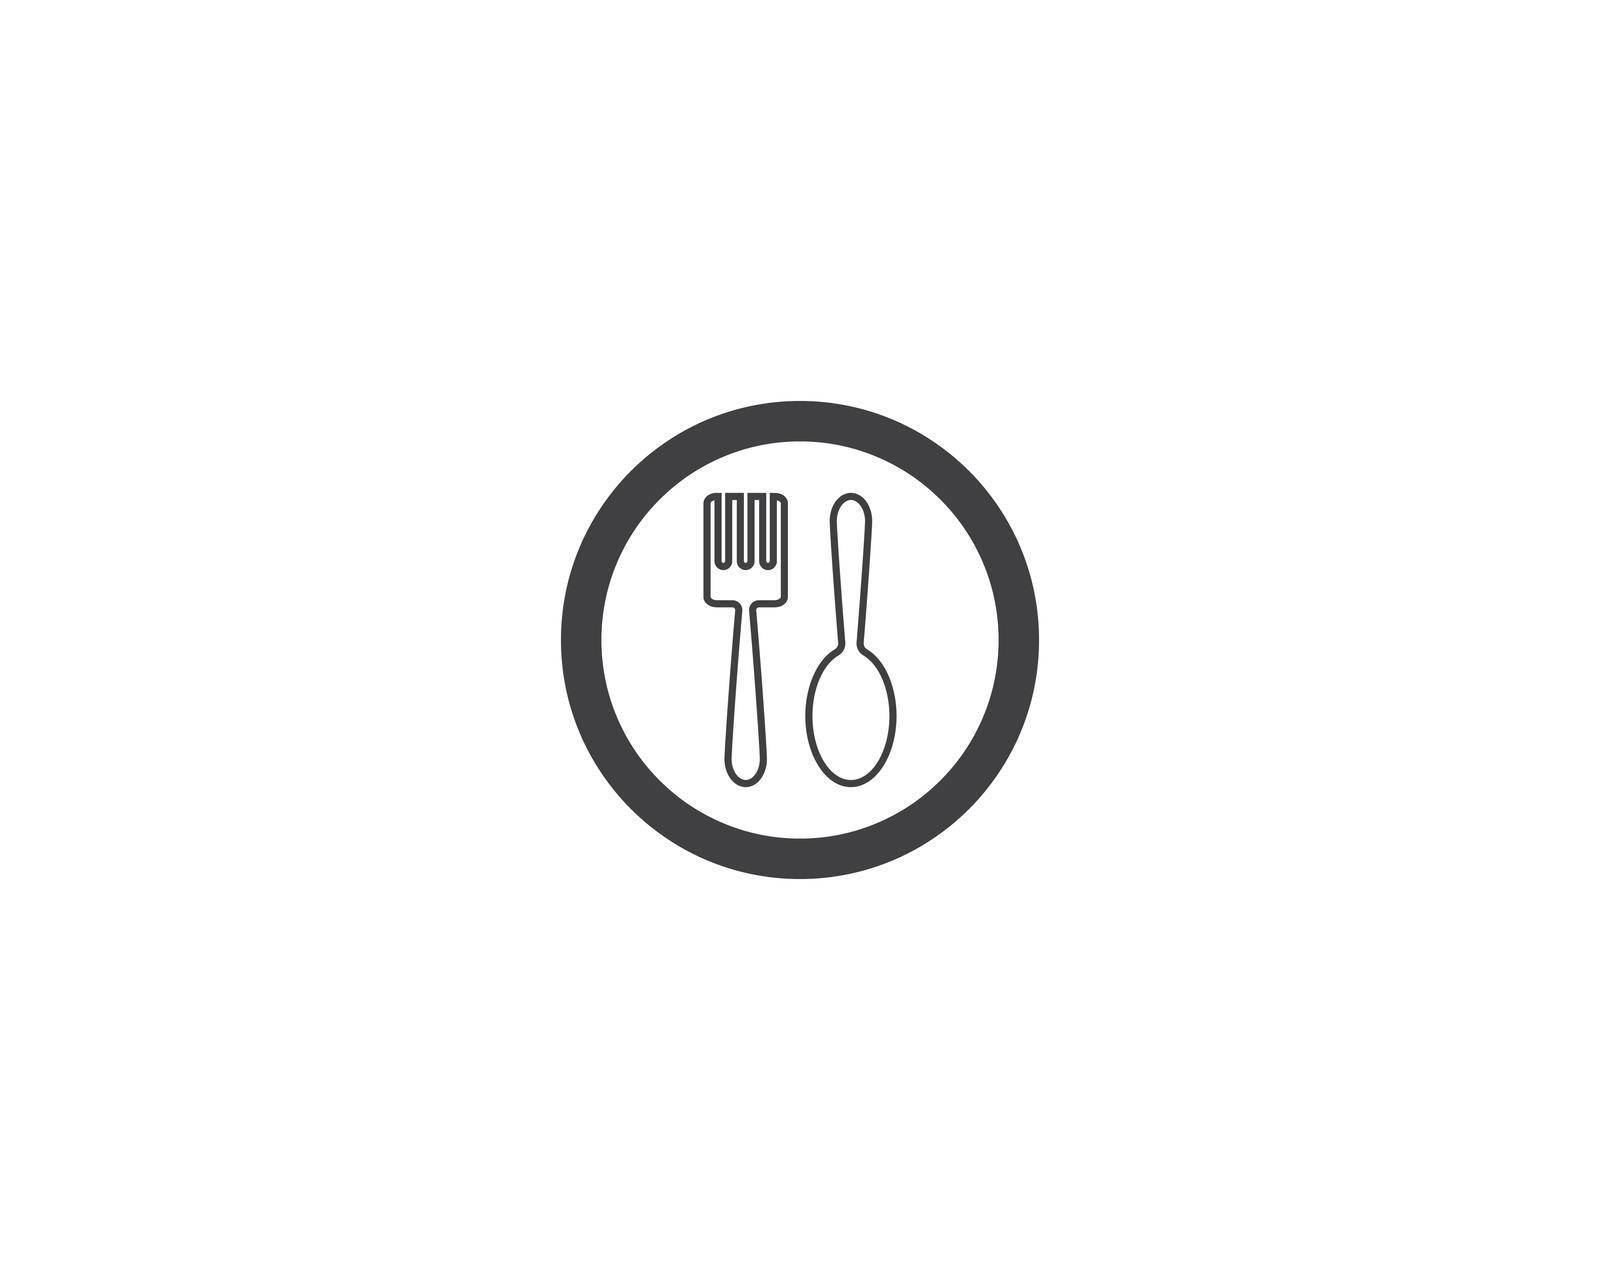 Spoon and fork logo template vector icon